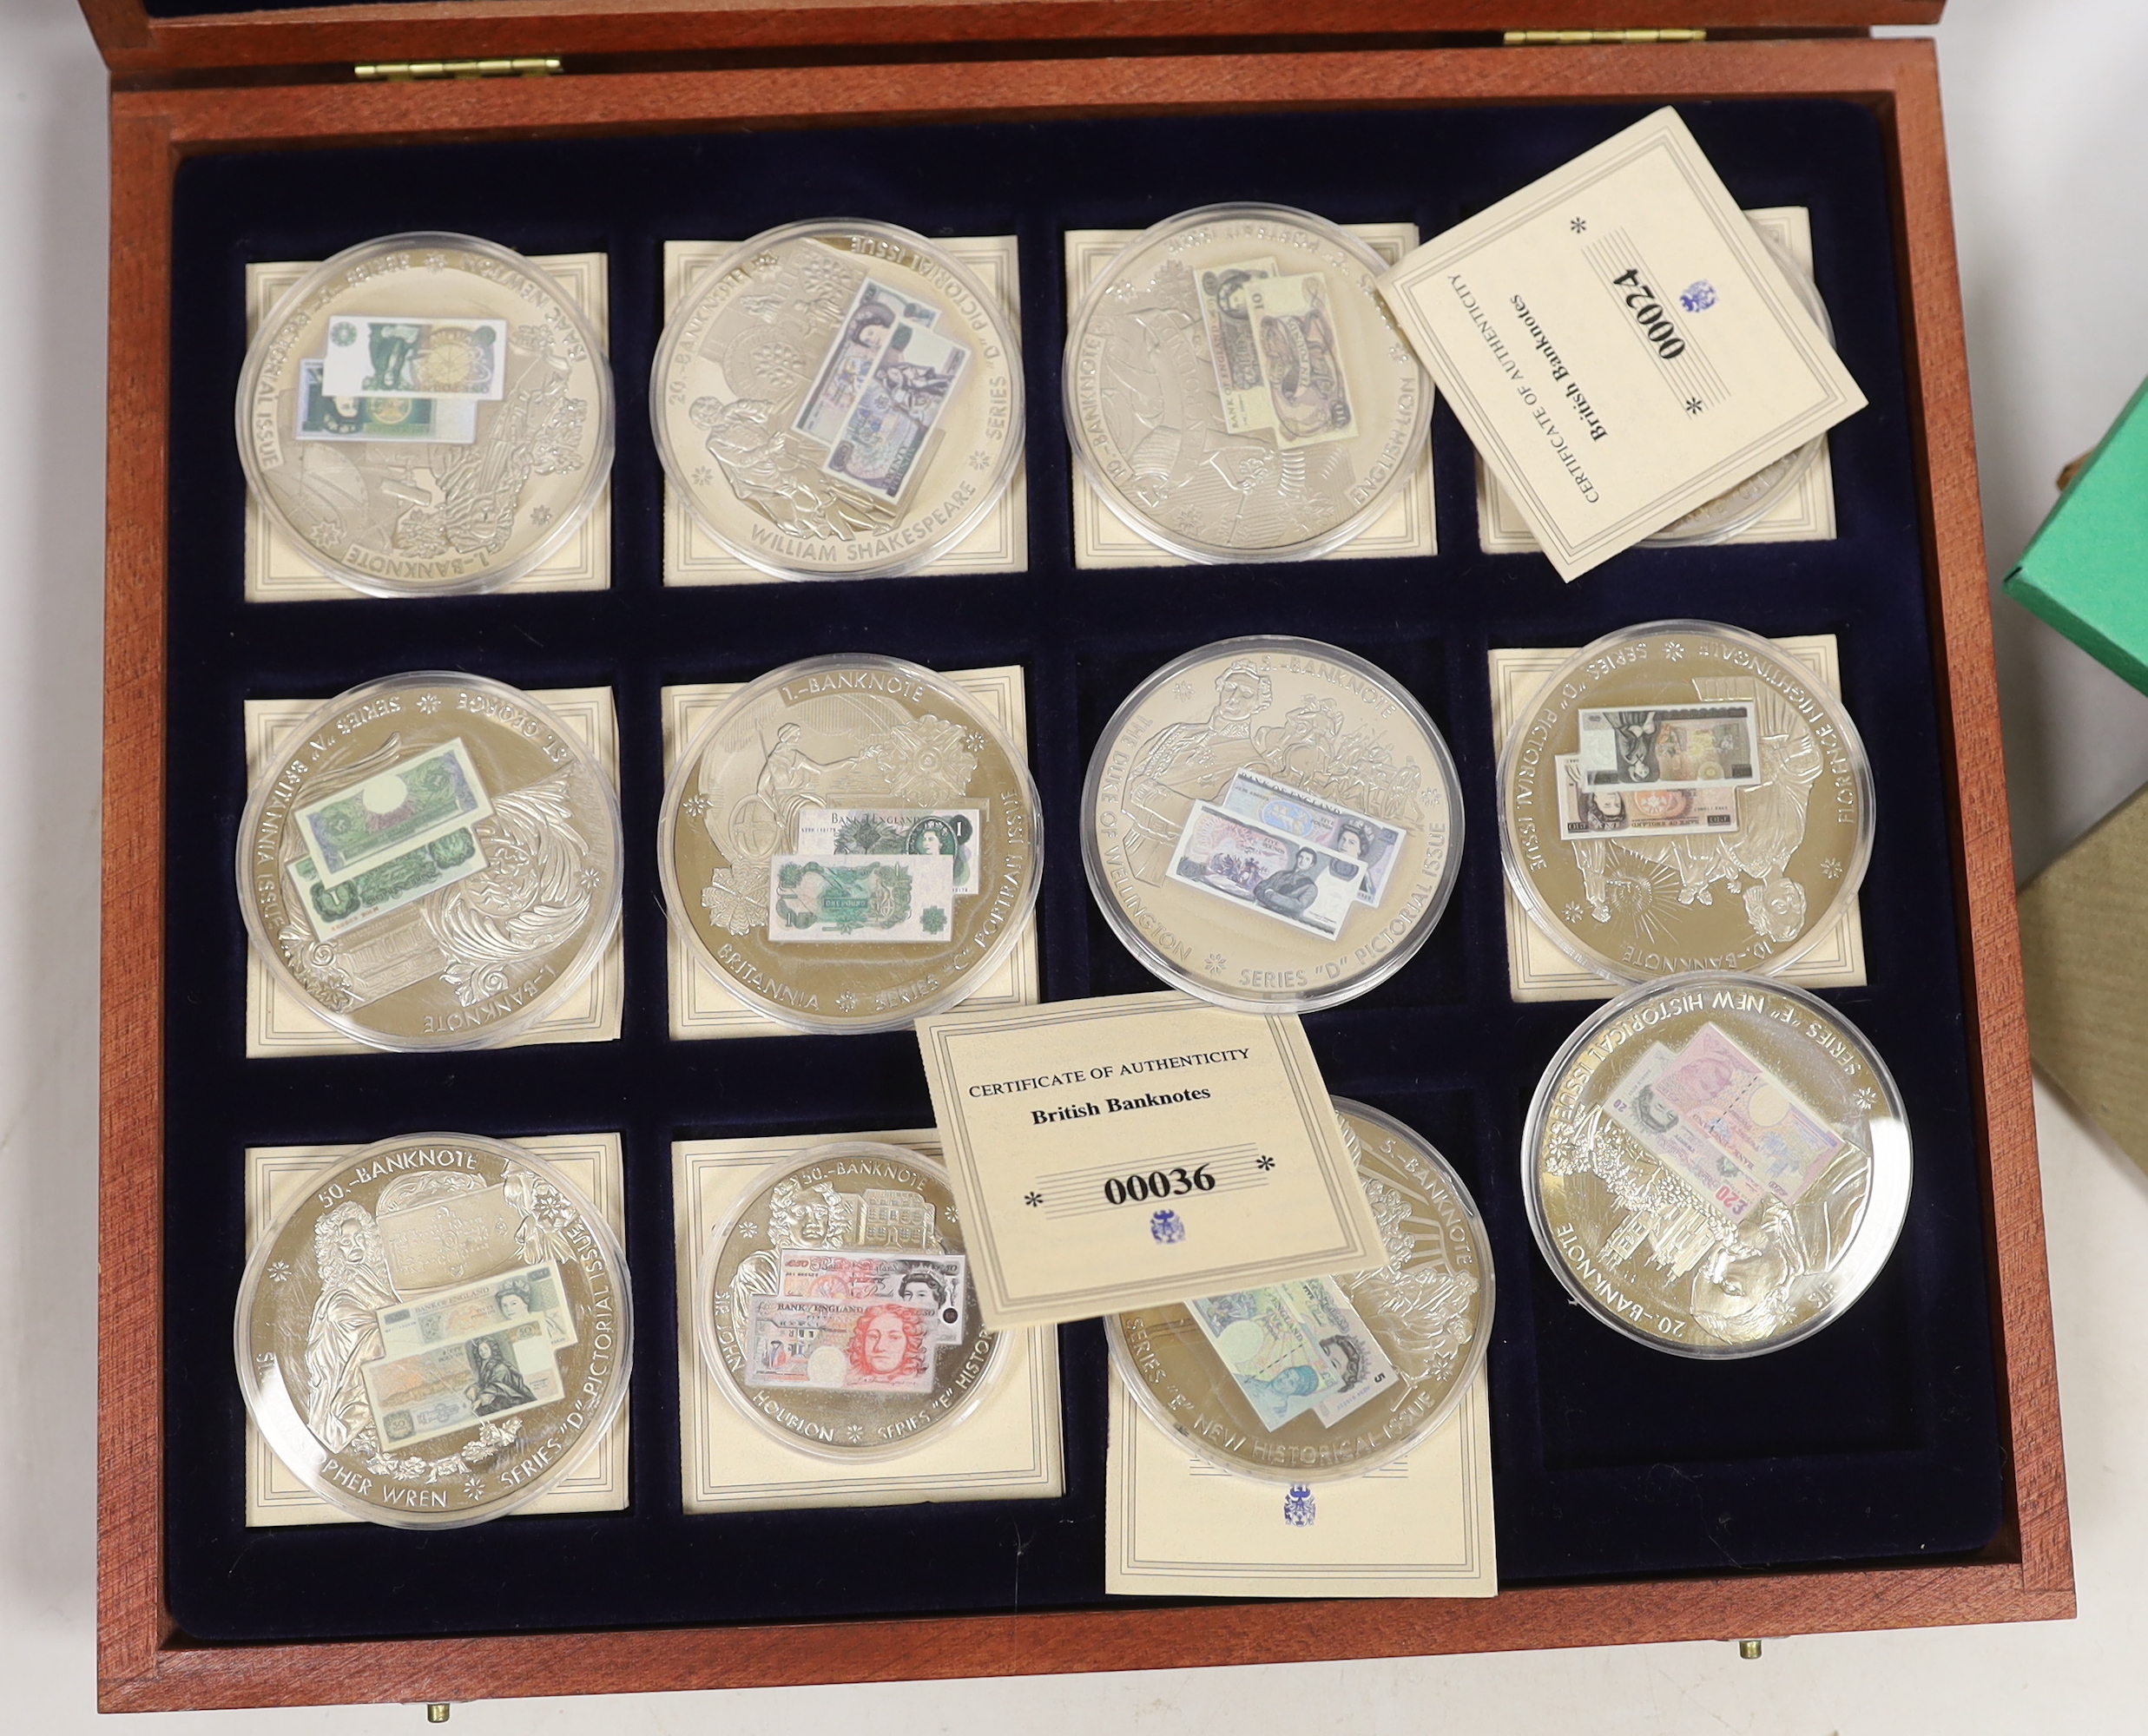 Six Royal Mint British coin proof sets, 1970s, 3 cases of 'British banknotes', commemorative coins, other various Queen Elizabeth II coins.